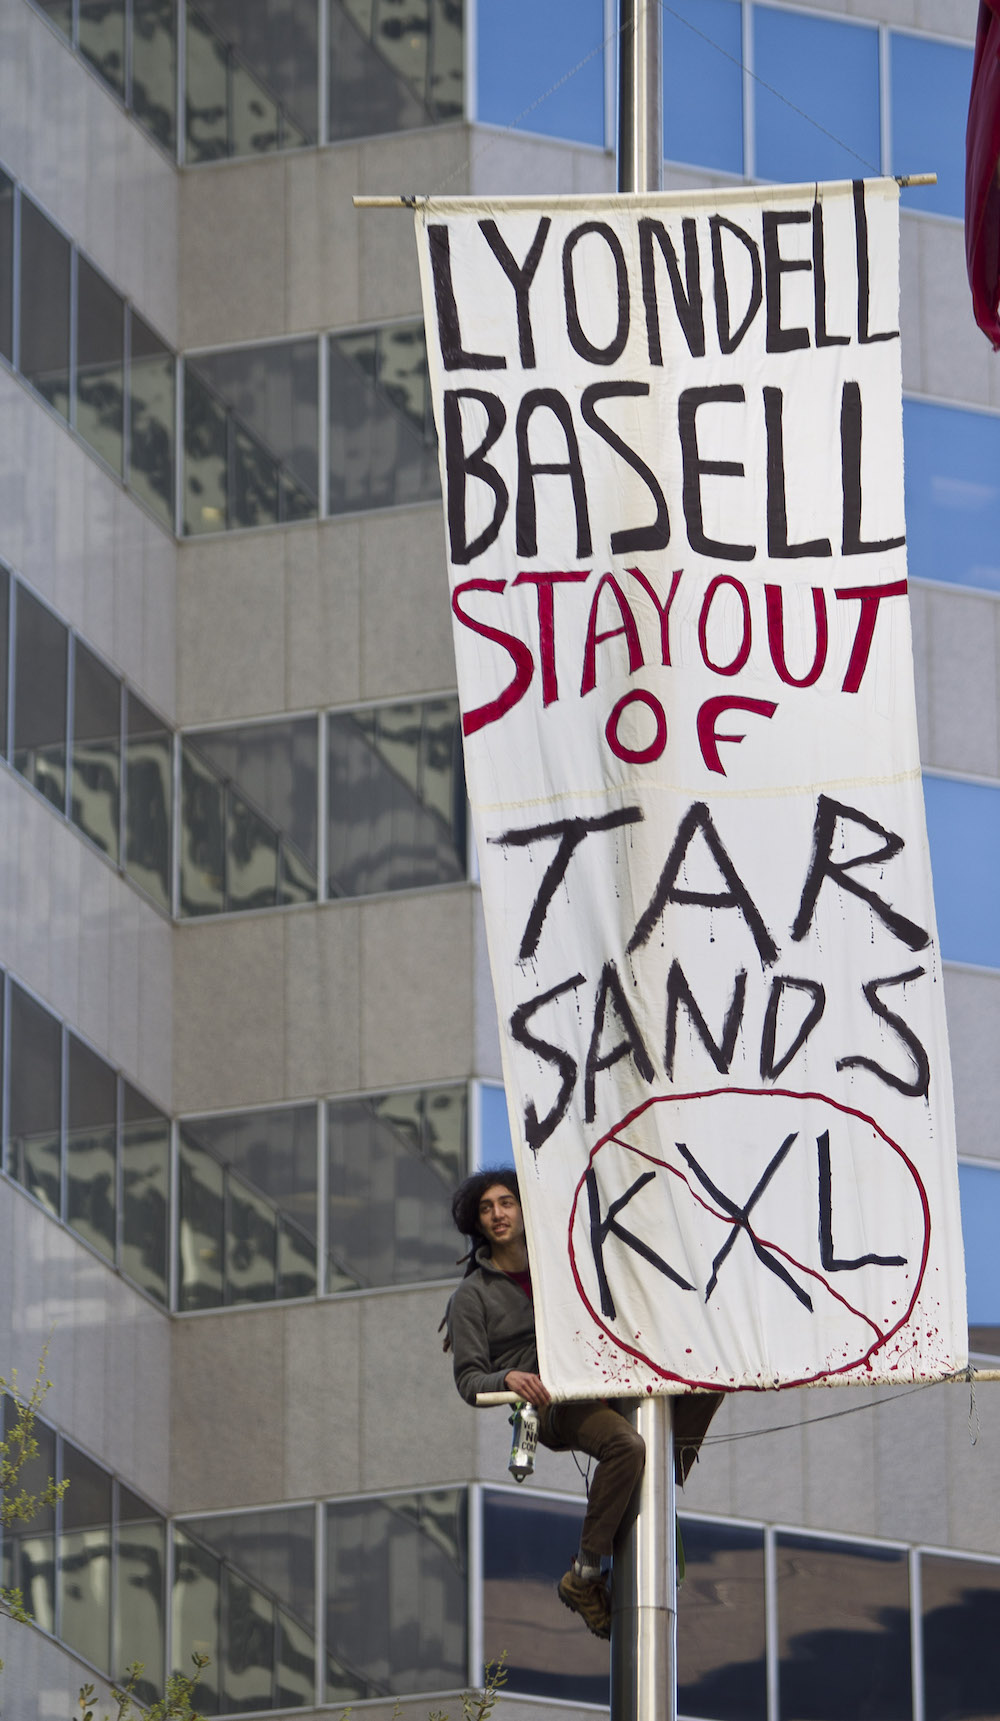 A man climbs a poll to hang a sign saying Lyondell Basell stay out of tar sands